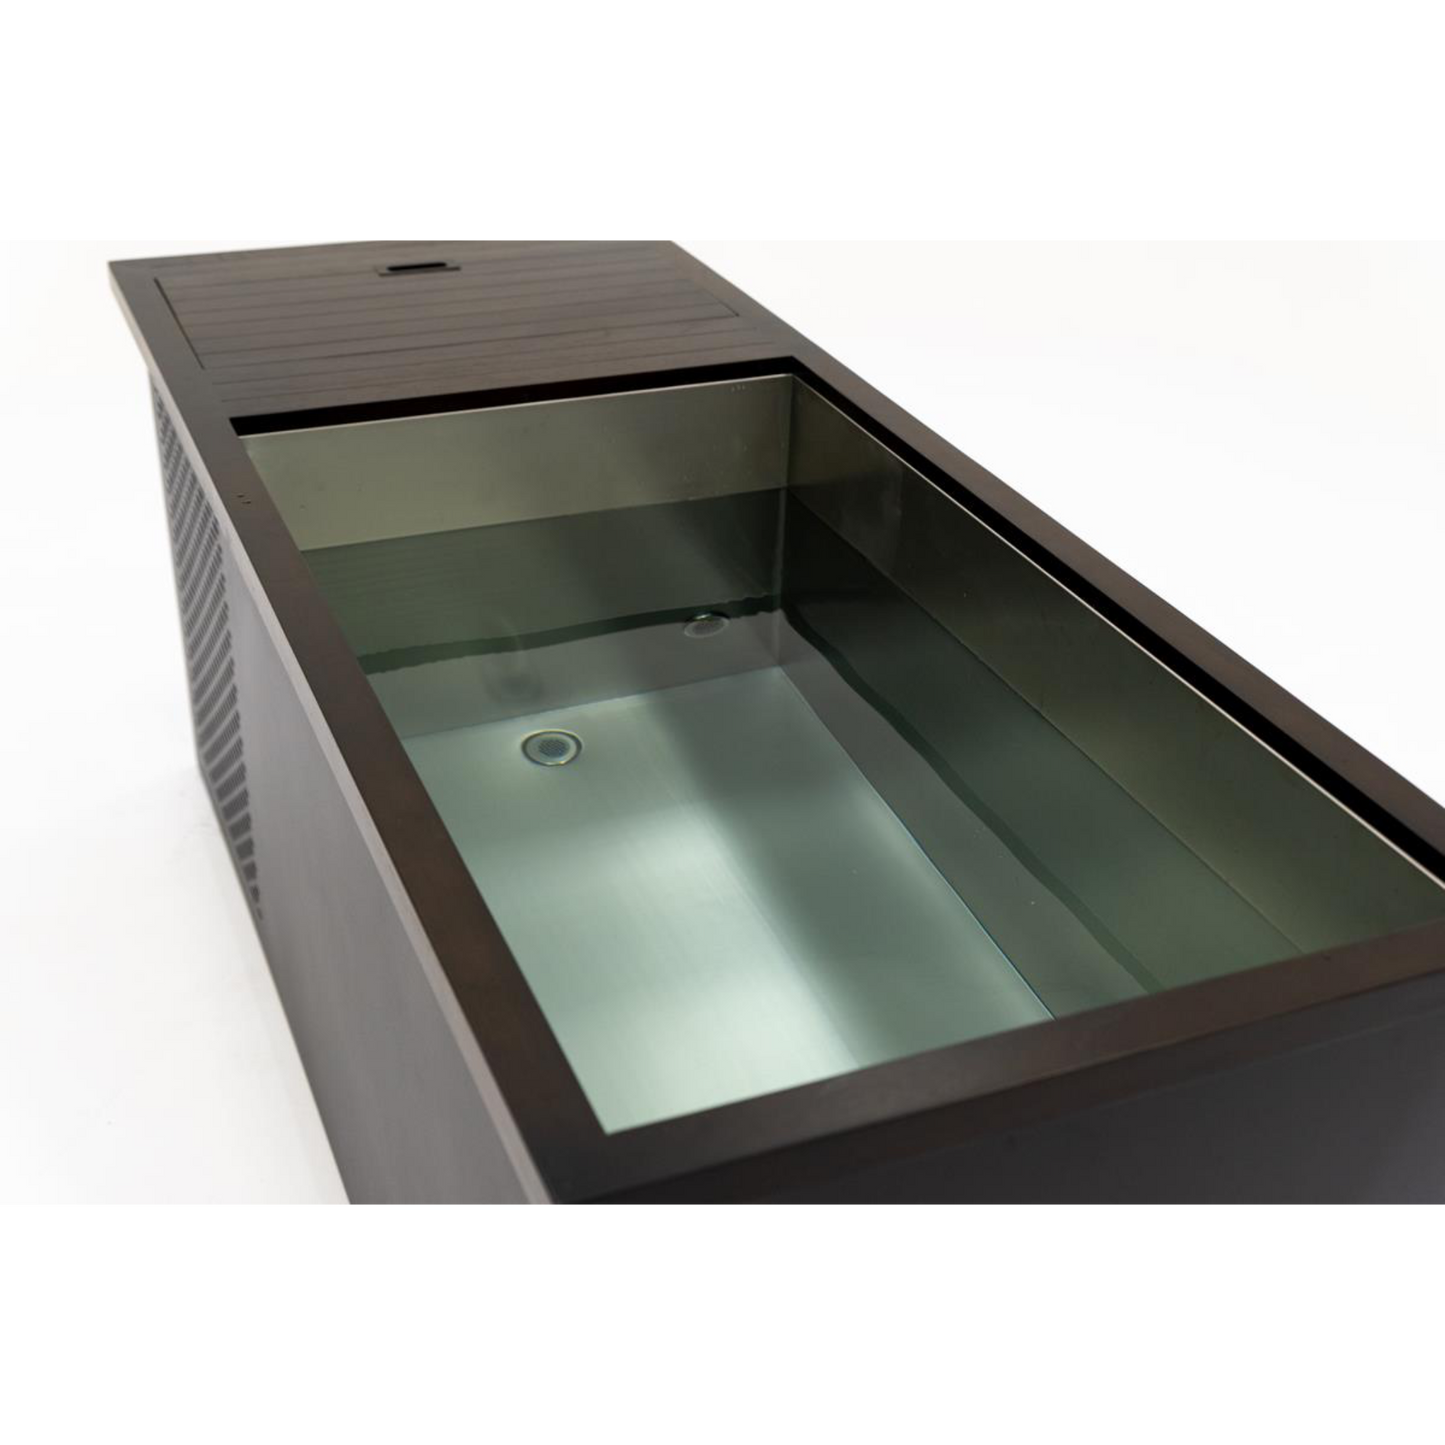 Ice Bath | Chill Tub - Complete with Chiller, Filtration, Ozone and Temperature Display